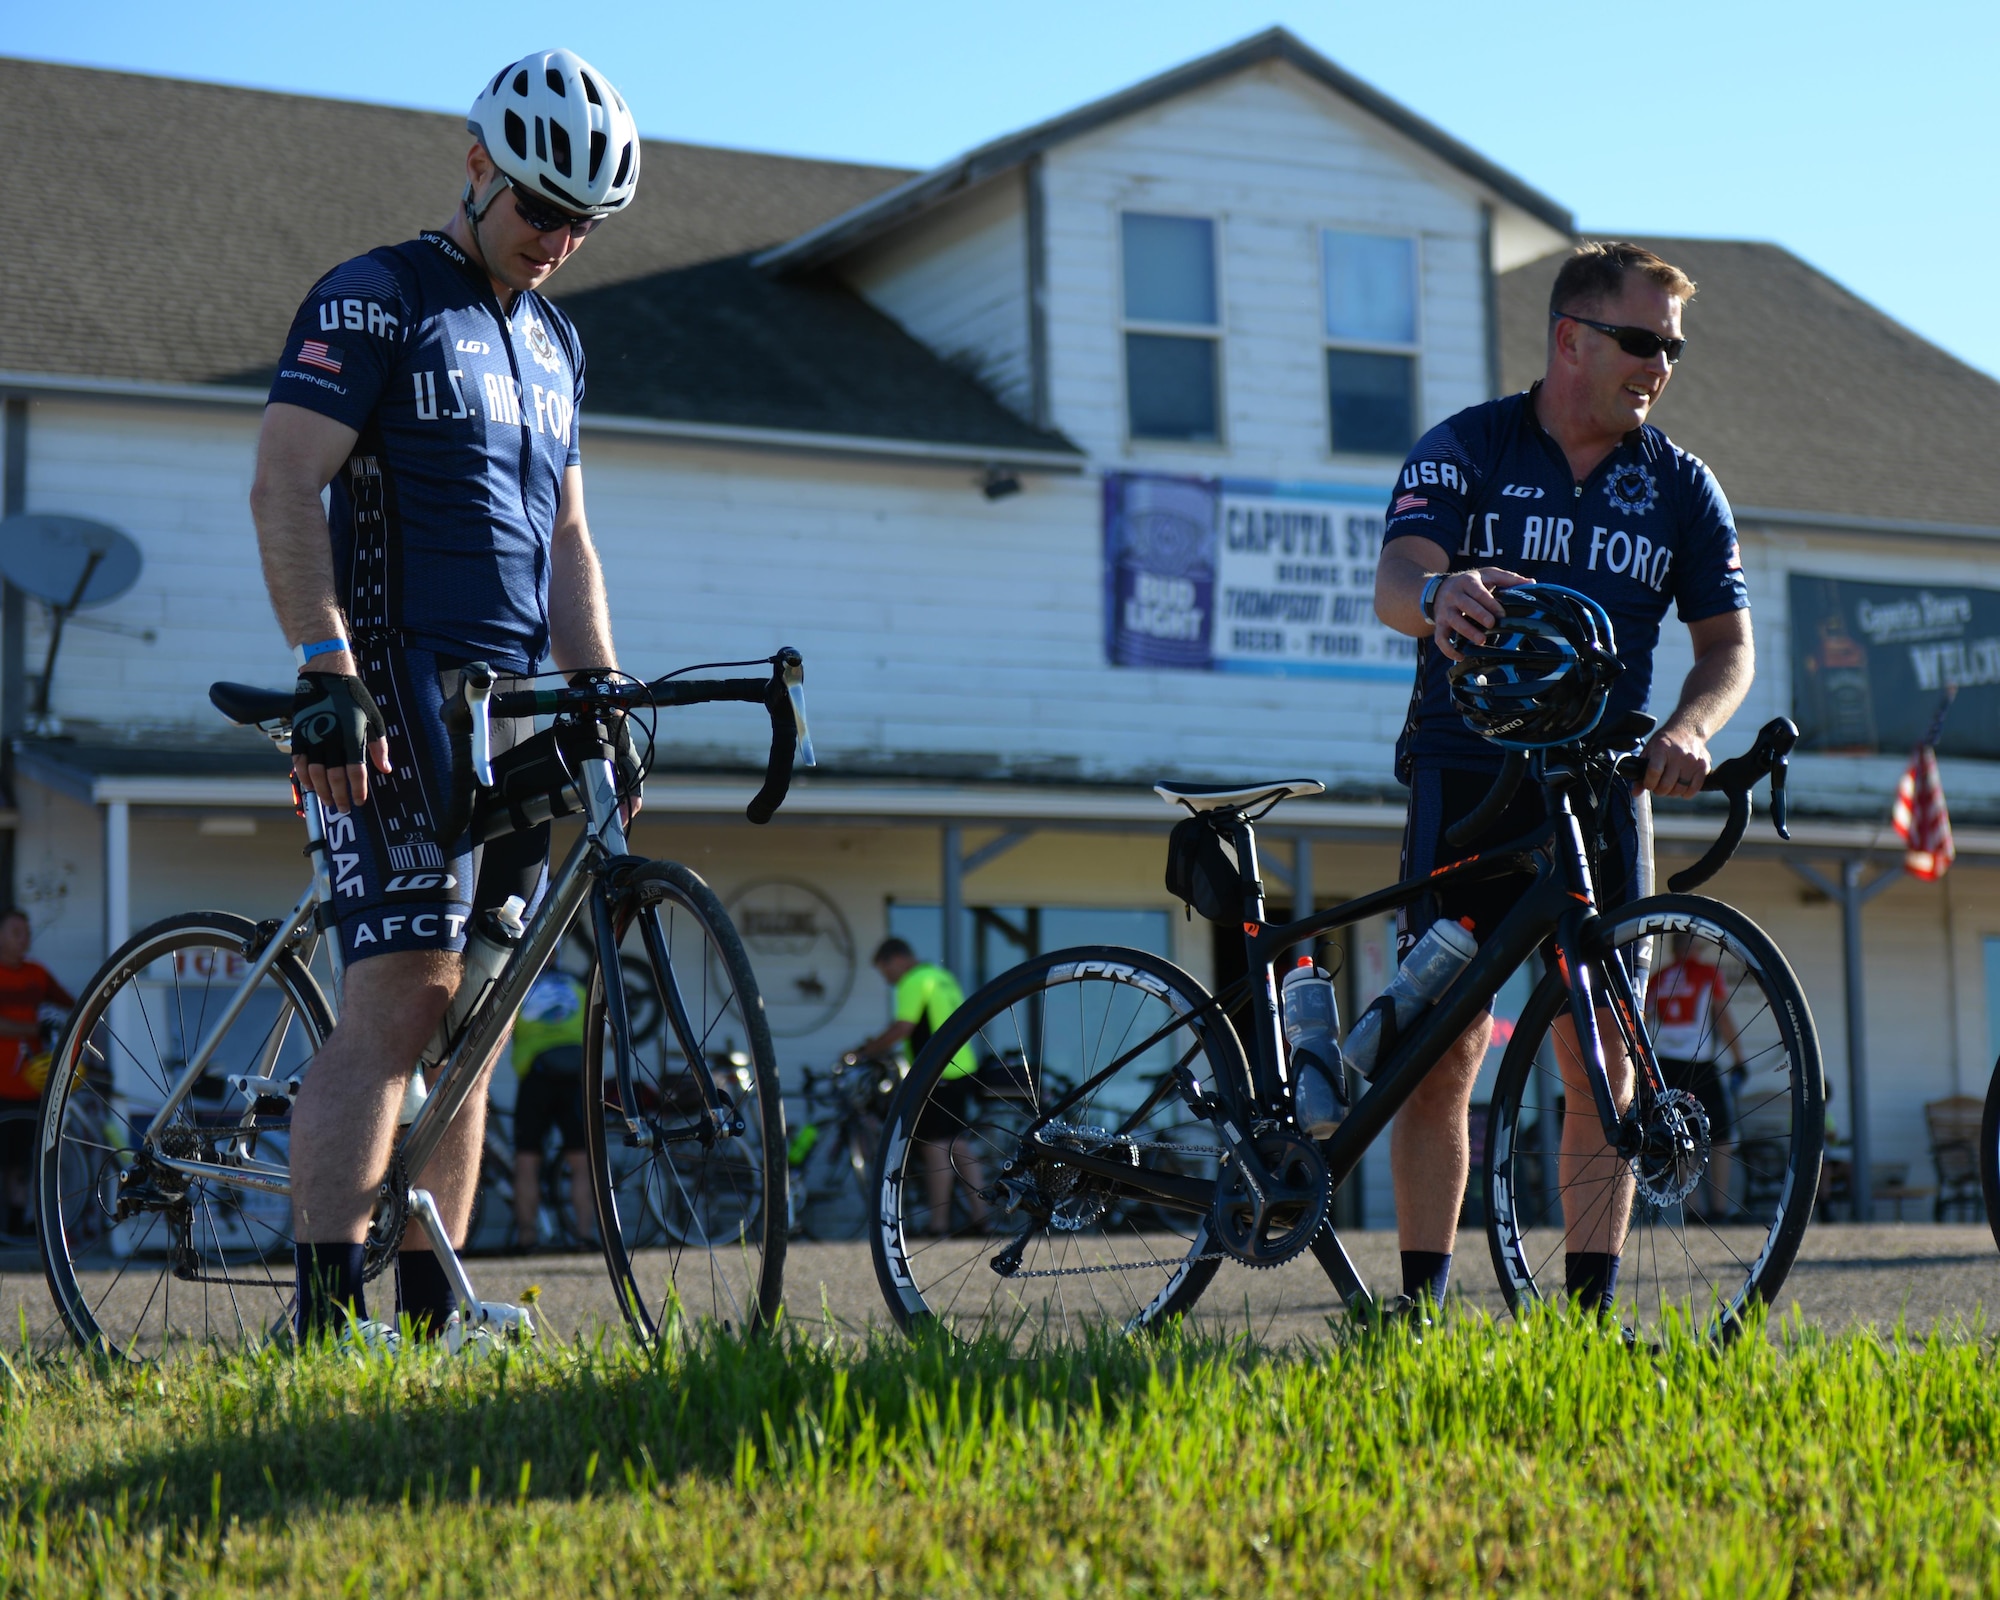 Maj. Anthony Bares, the director of inspections assigned to the 28th Bomb Wing Inspector General office, and Capt. Eben Engler, a B-1 Bomber weapon systems officer assigned to the 34th Bomb Squadron, prepare to continue the Ride Across South Dakota bike tour in Caputa, S.D., June 4, 2017. The Air Force Cycling Team has over 150 members, and supports other cyclists during the Register’s Annual Great Bicycle Ride Across Iowa whether it is promoting the Air Force or fixing bicycles on the route. (U.S. Air Force photo by Airman Nicolas Z. Erwin)